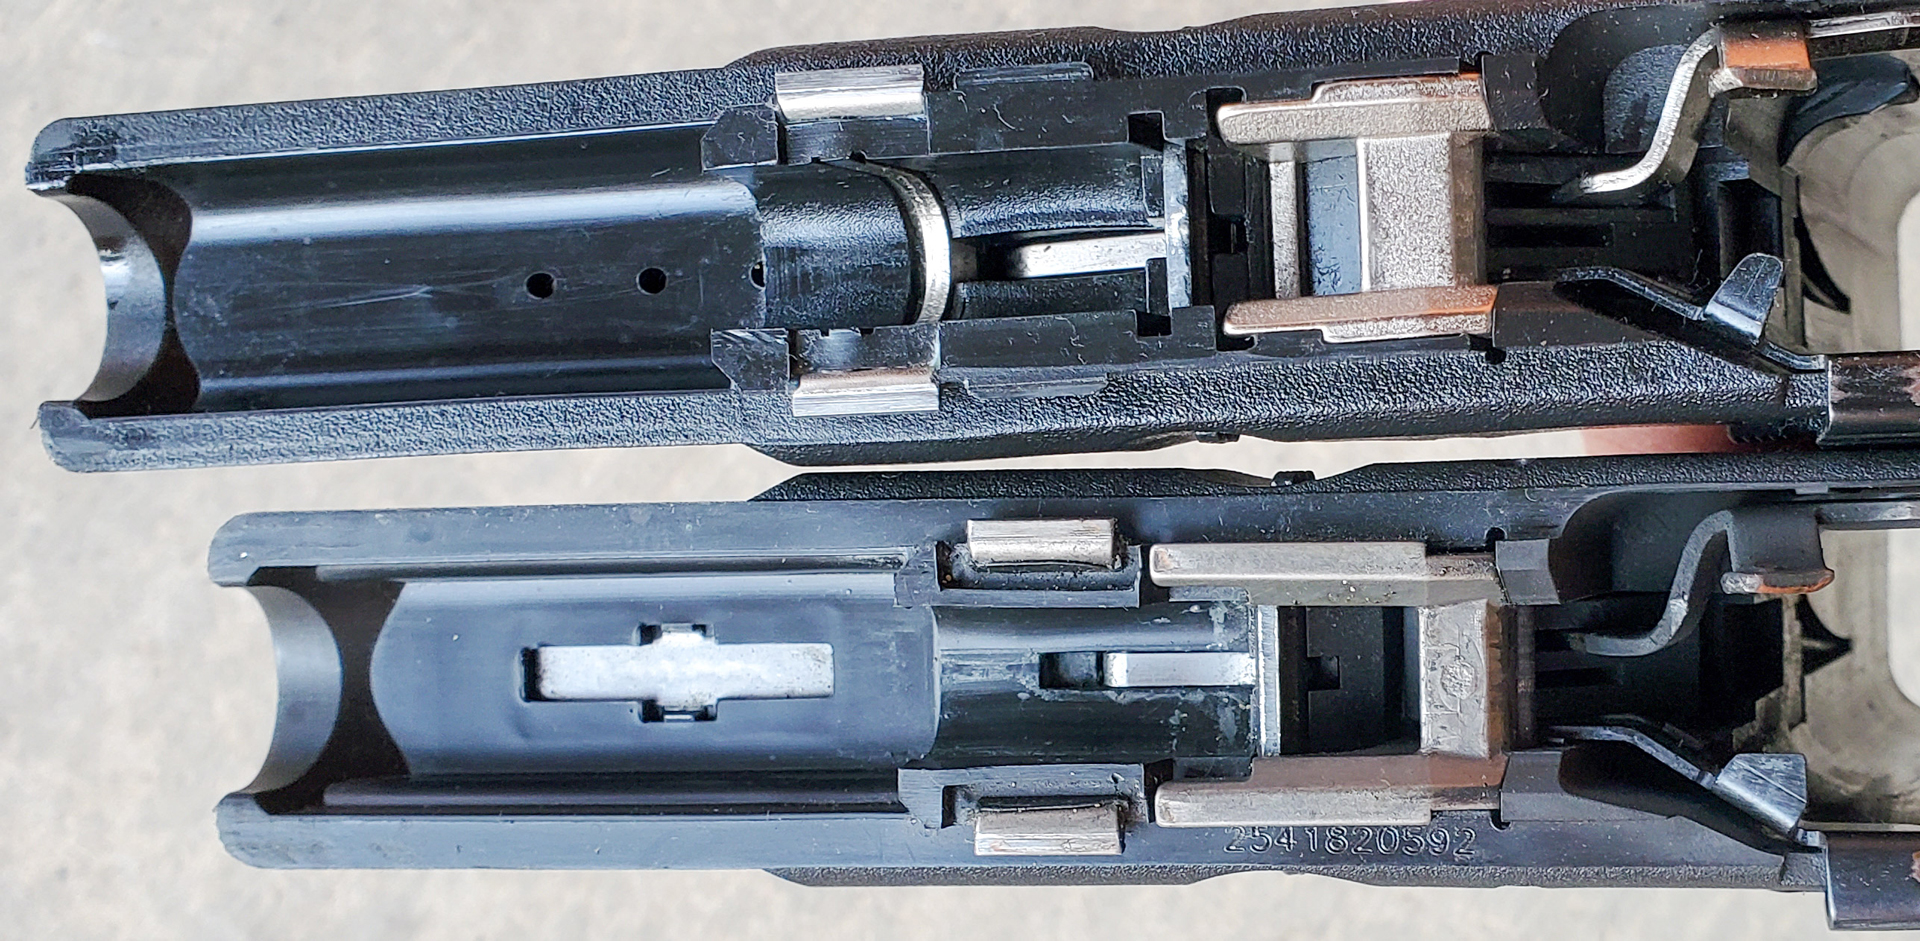 The two "legacy" photos are of pre-Gen5 Glock 17 and 19 frames side-by-side. Note the differences in the overall lengths as well as the differences in the locking blocks. A Gen3 G19 frame is on the bottom with a Gen2 17 frame above.